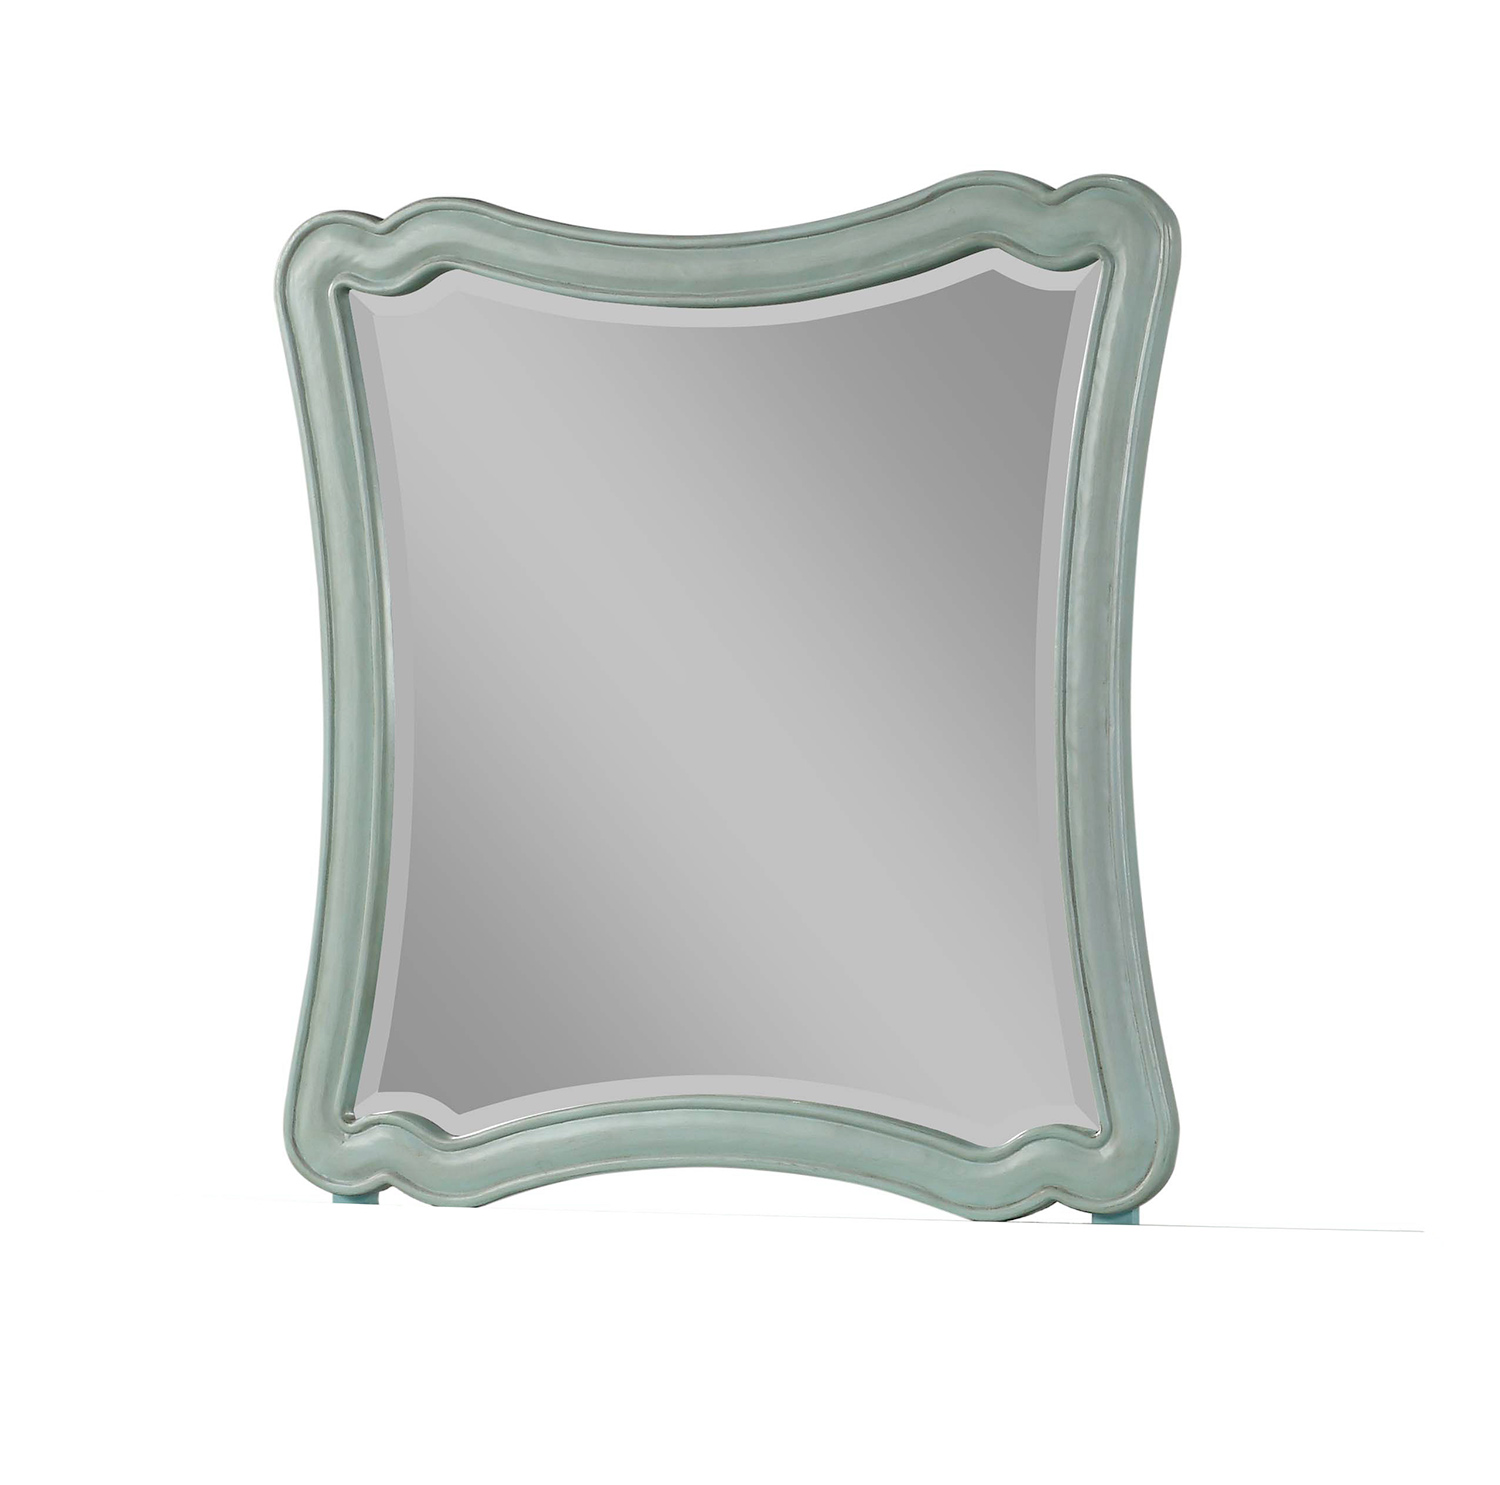 Acme Morre Mirror - Antique Teal